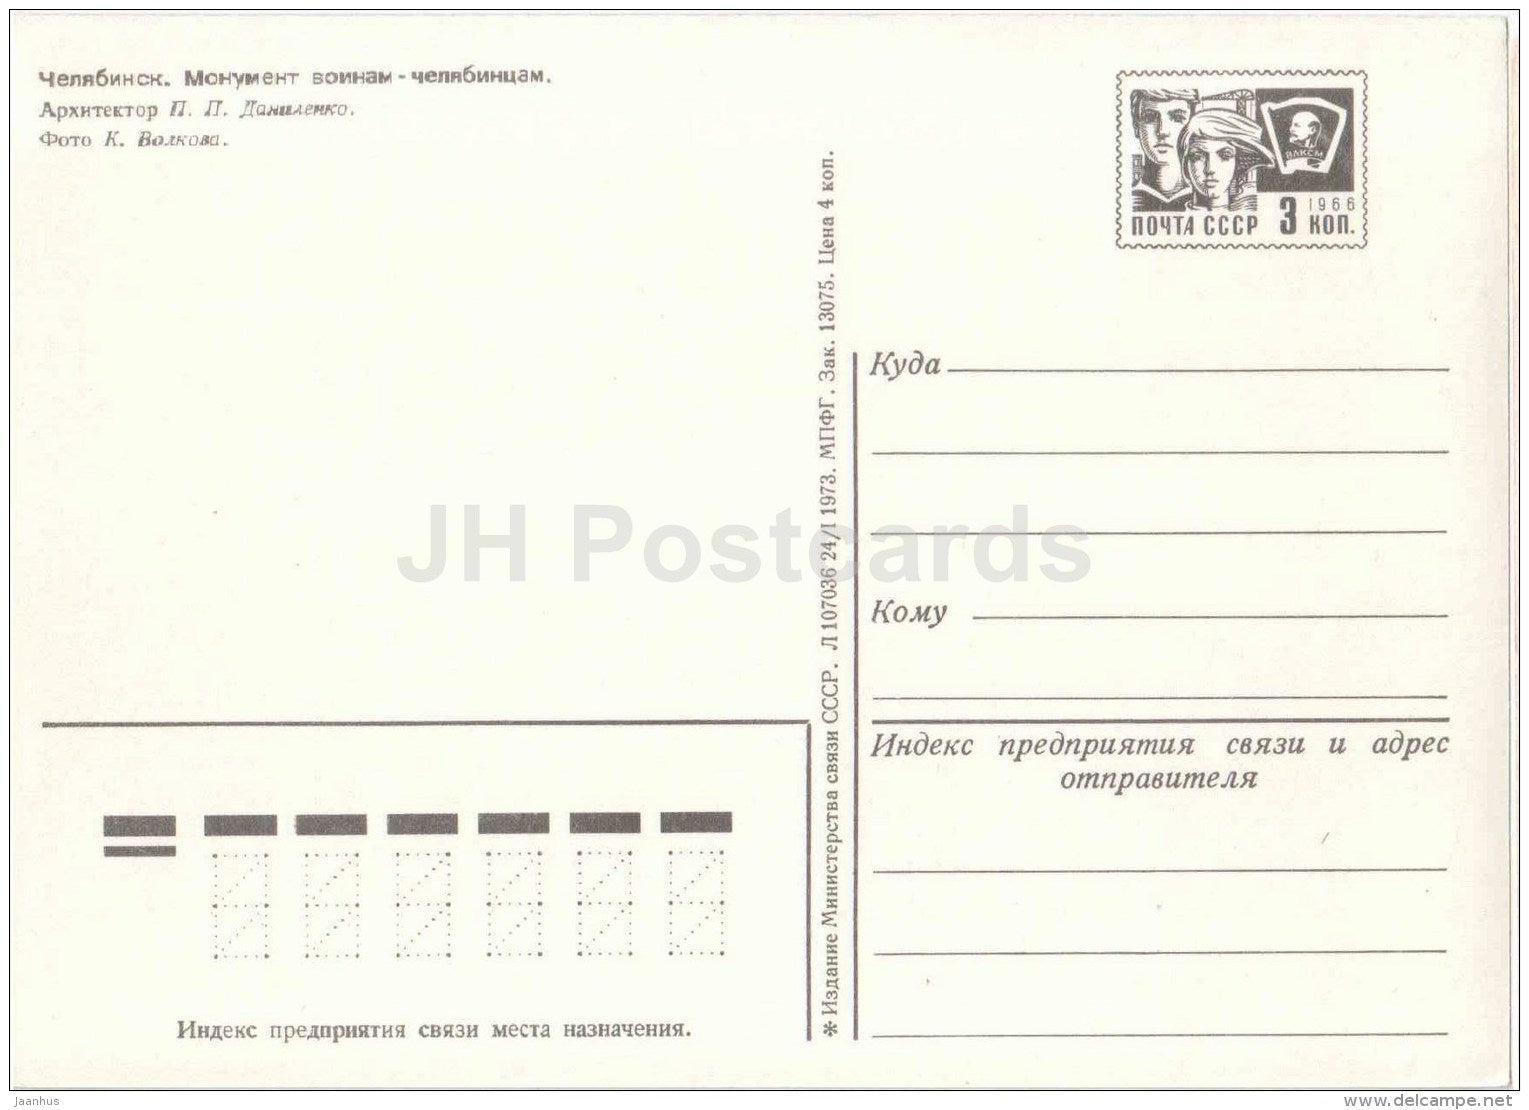 monument to Soldiers from Chelyabinsk - Chelyabinsk - postal stationery - 1973 - Russia USSR - unused - JH Postcards